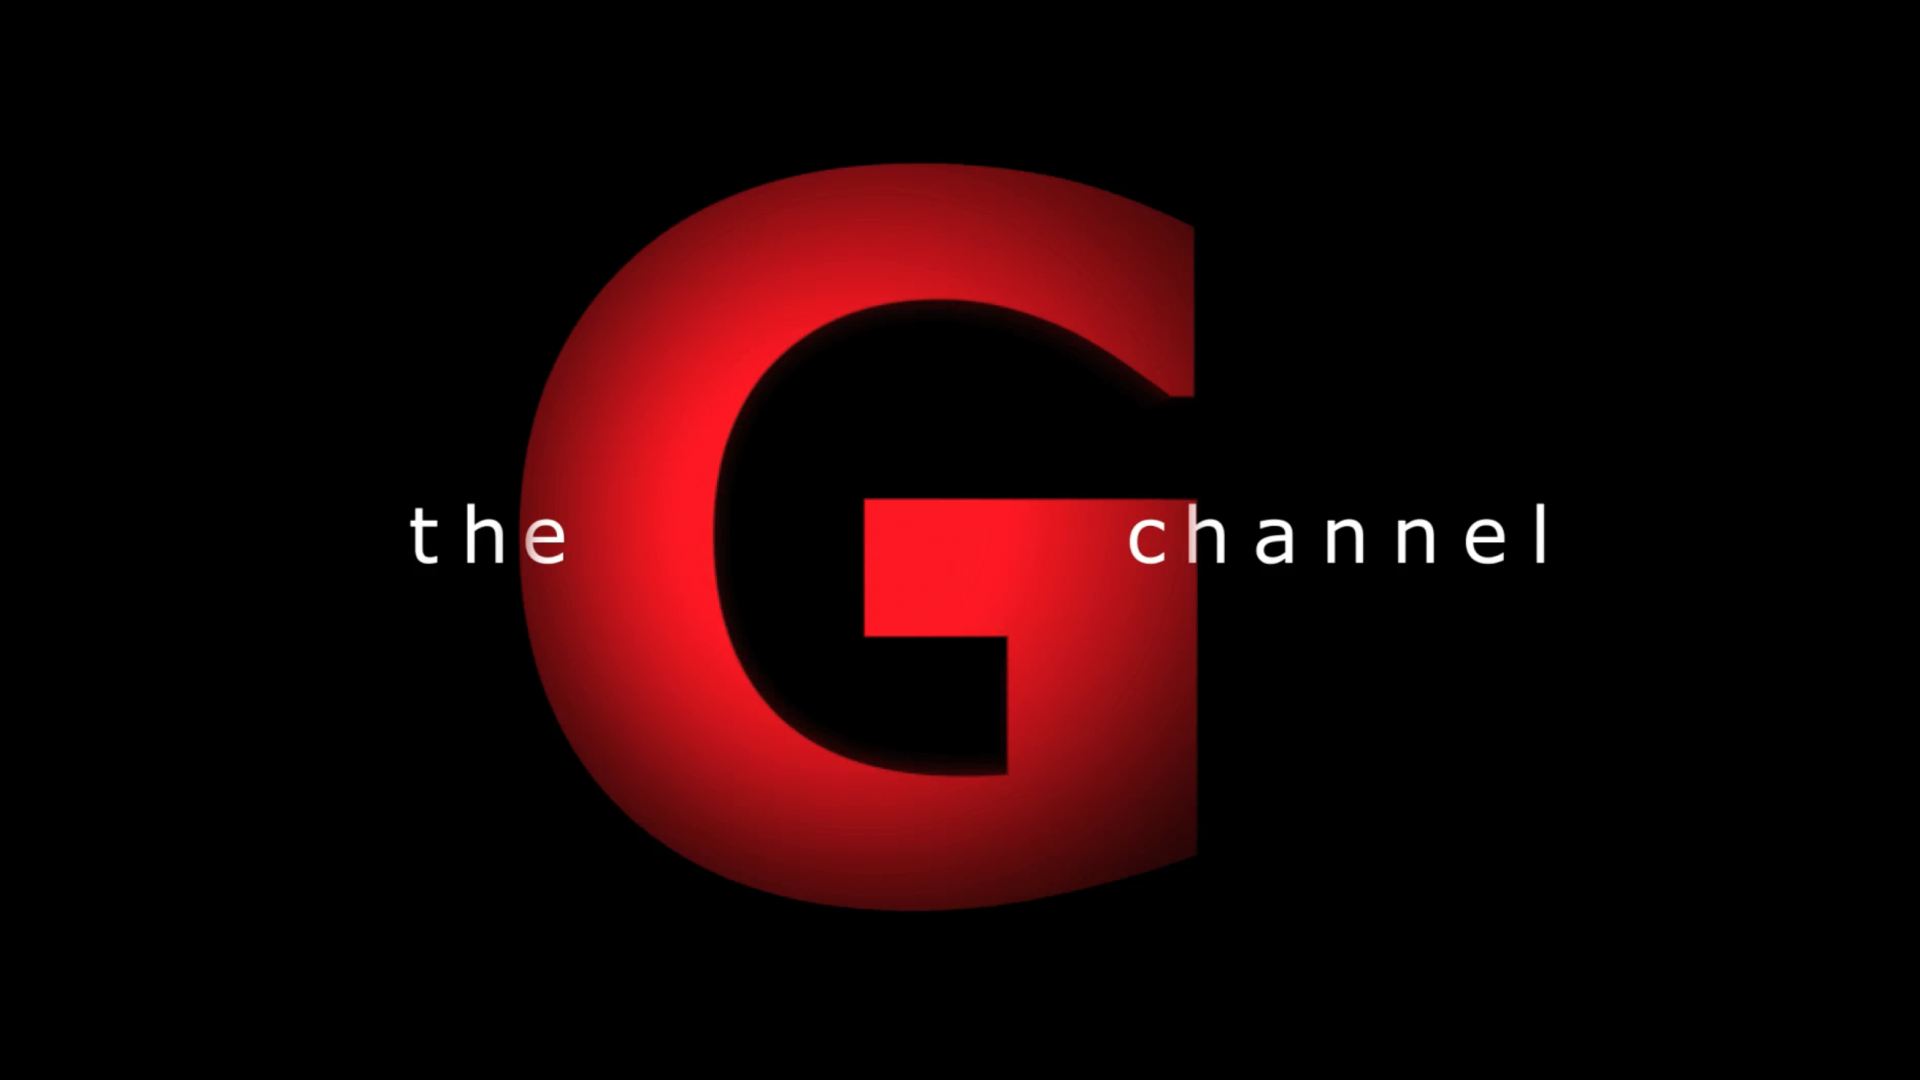 the G channel